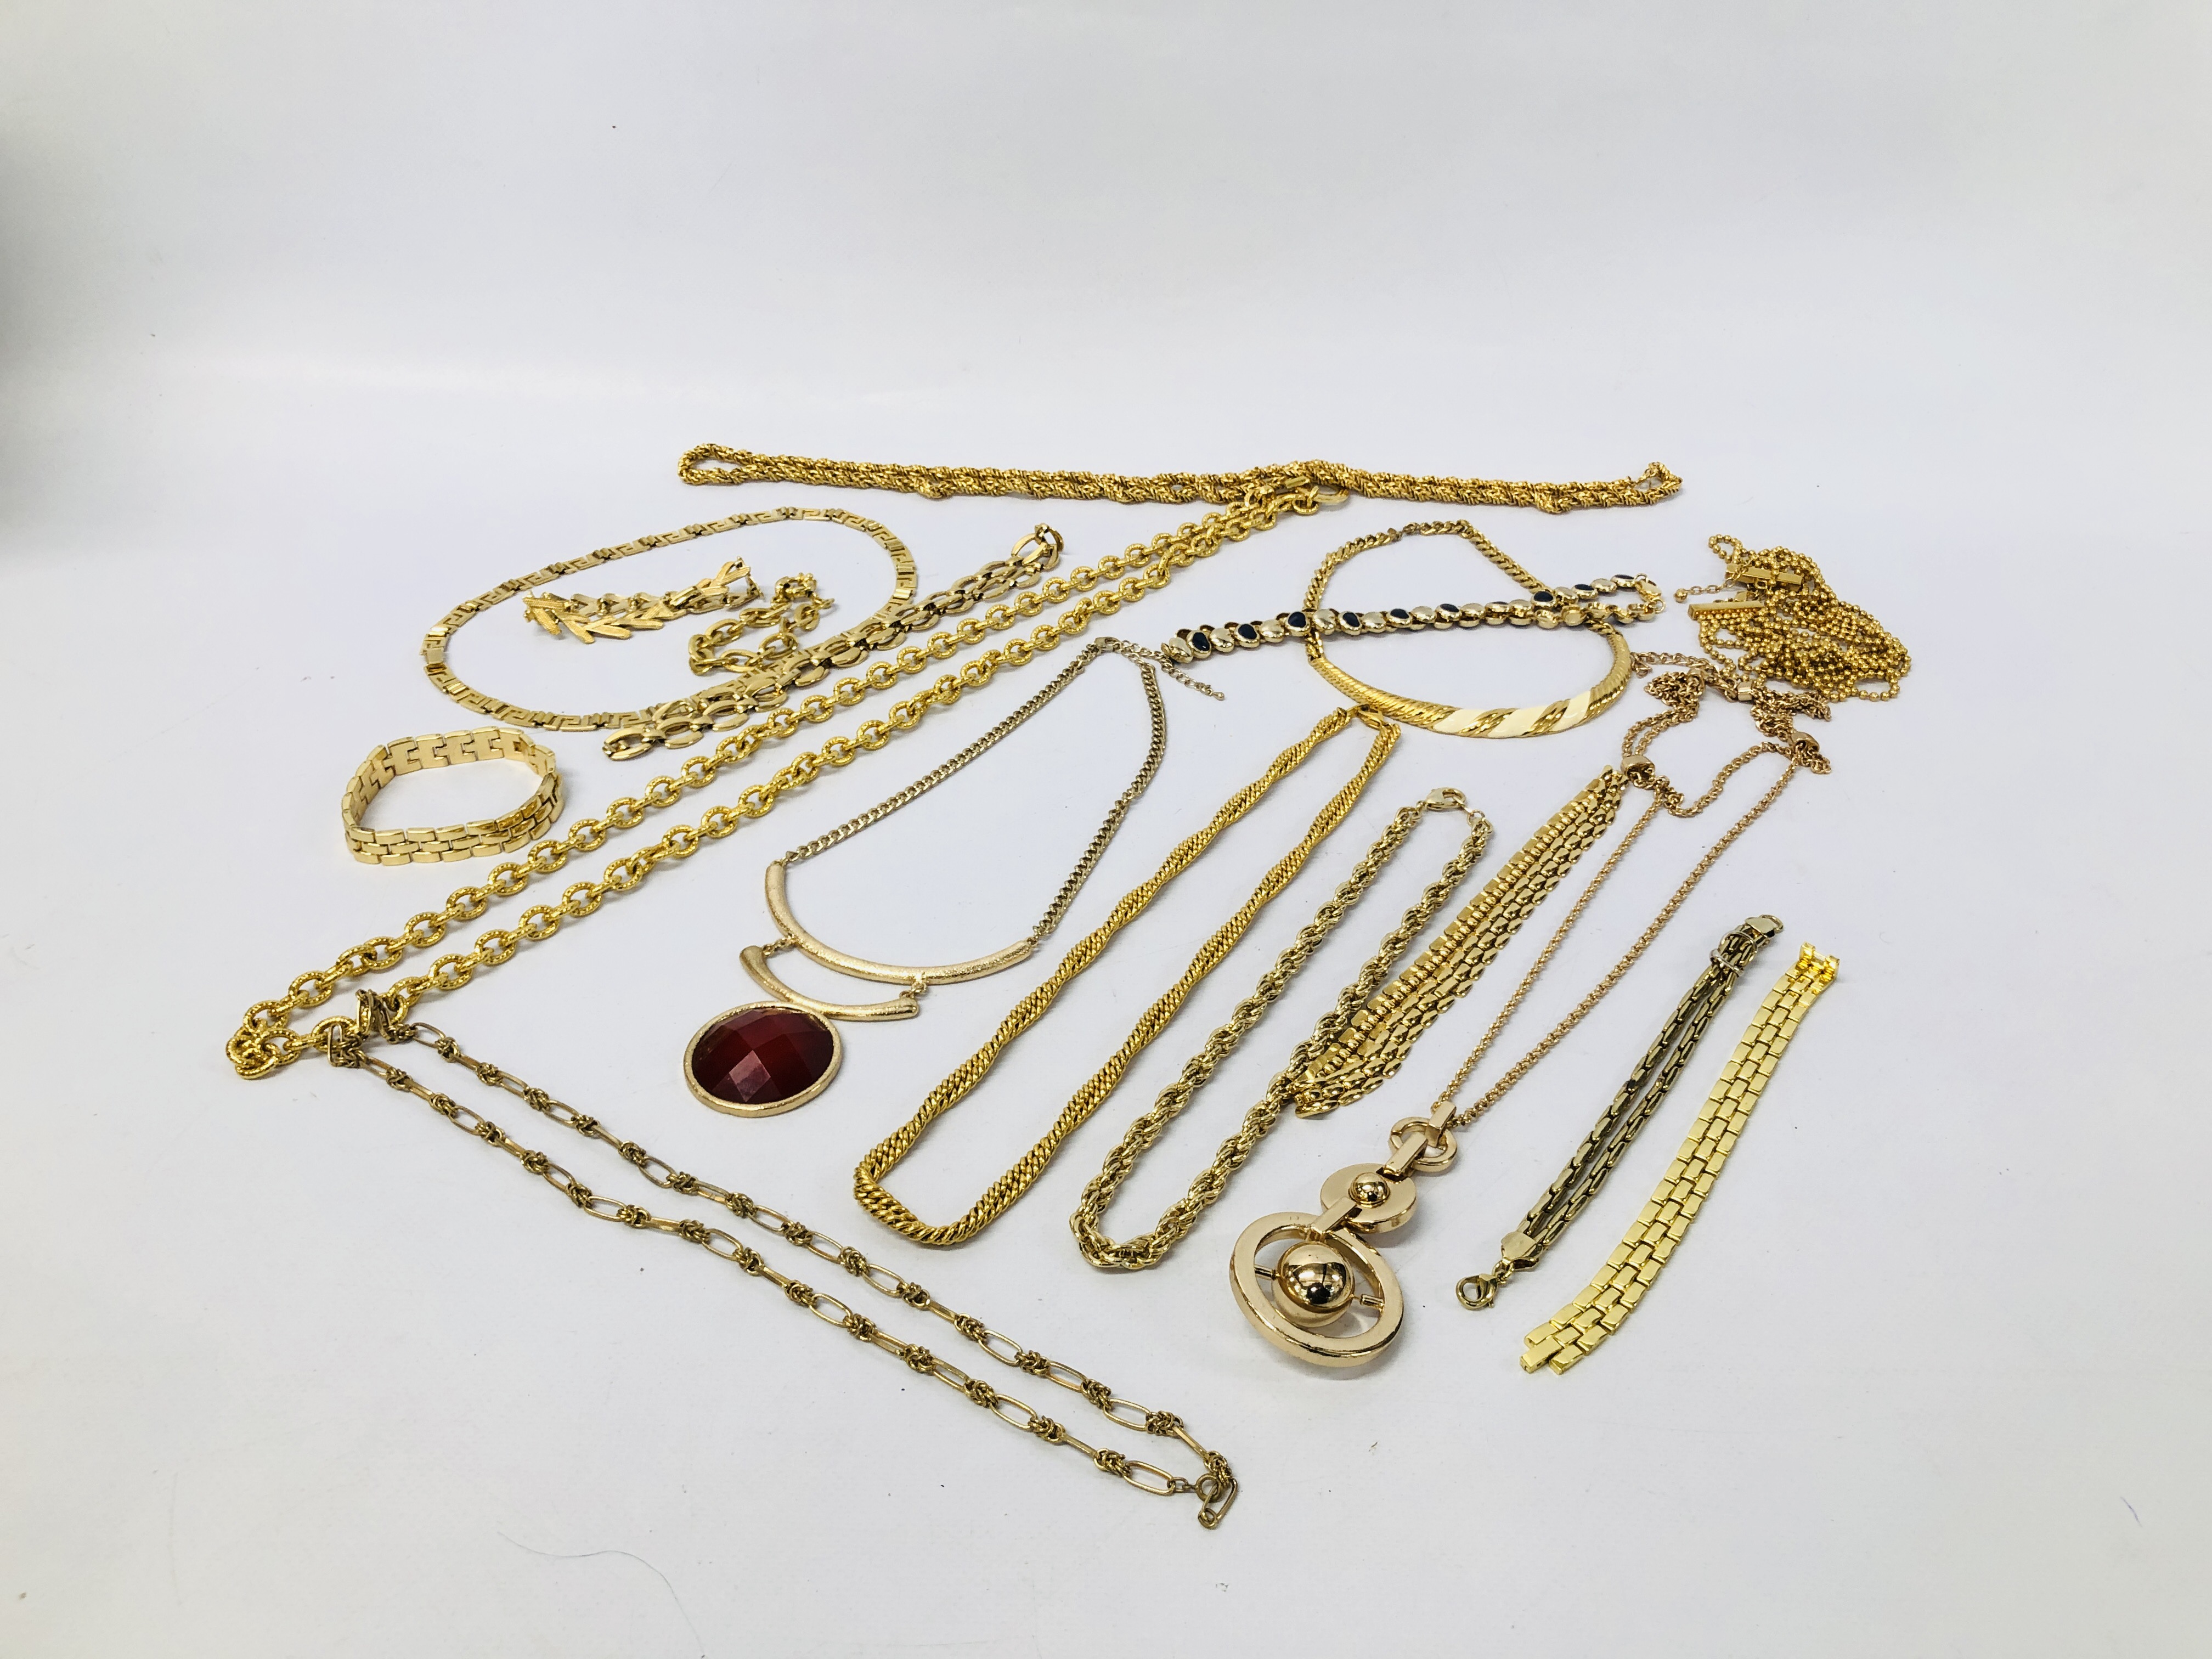 COLLECTION OF DESIGNER COSTUMER JEWELLERY, NECKLACES OF GOLD COLOUR VARIOUS DESIGNS AND LENGTH.